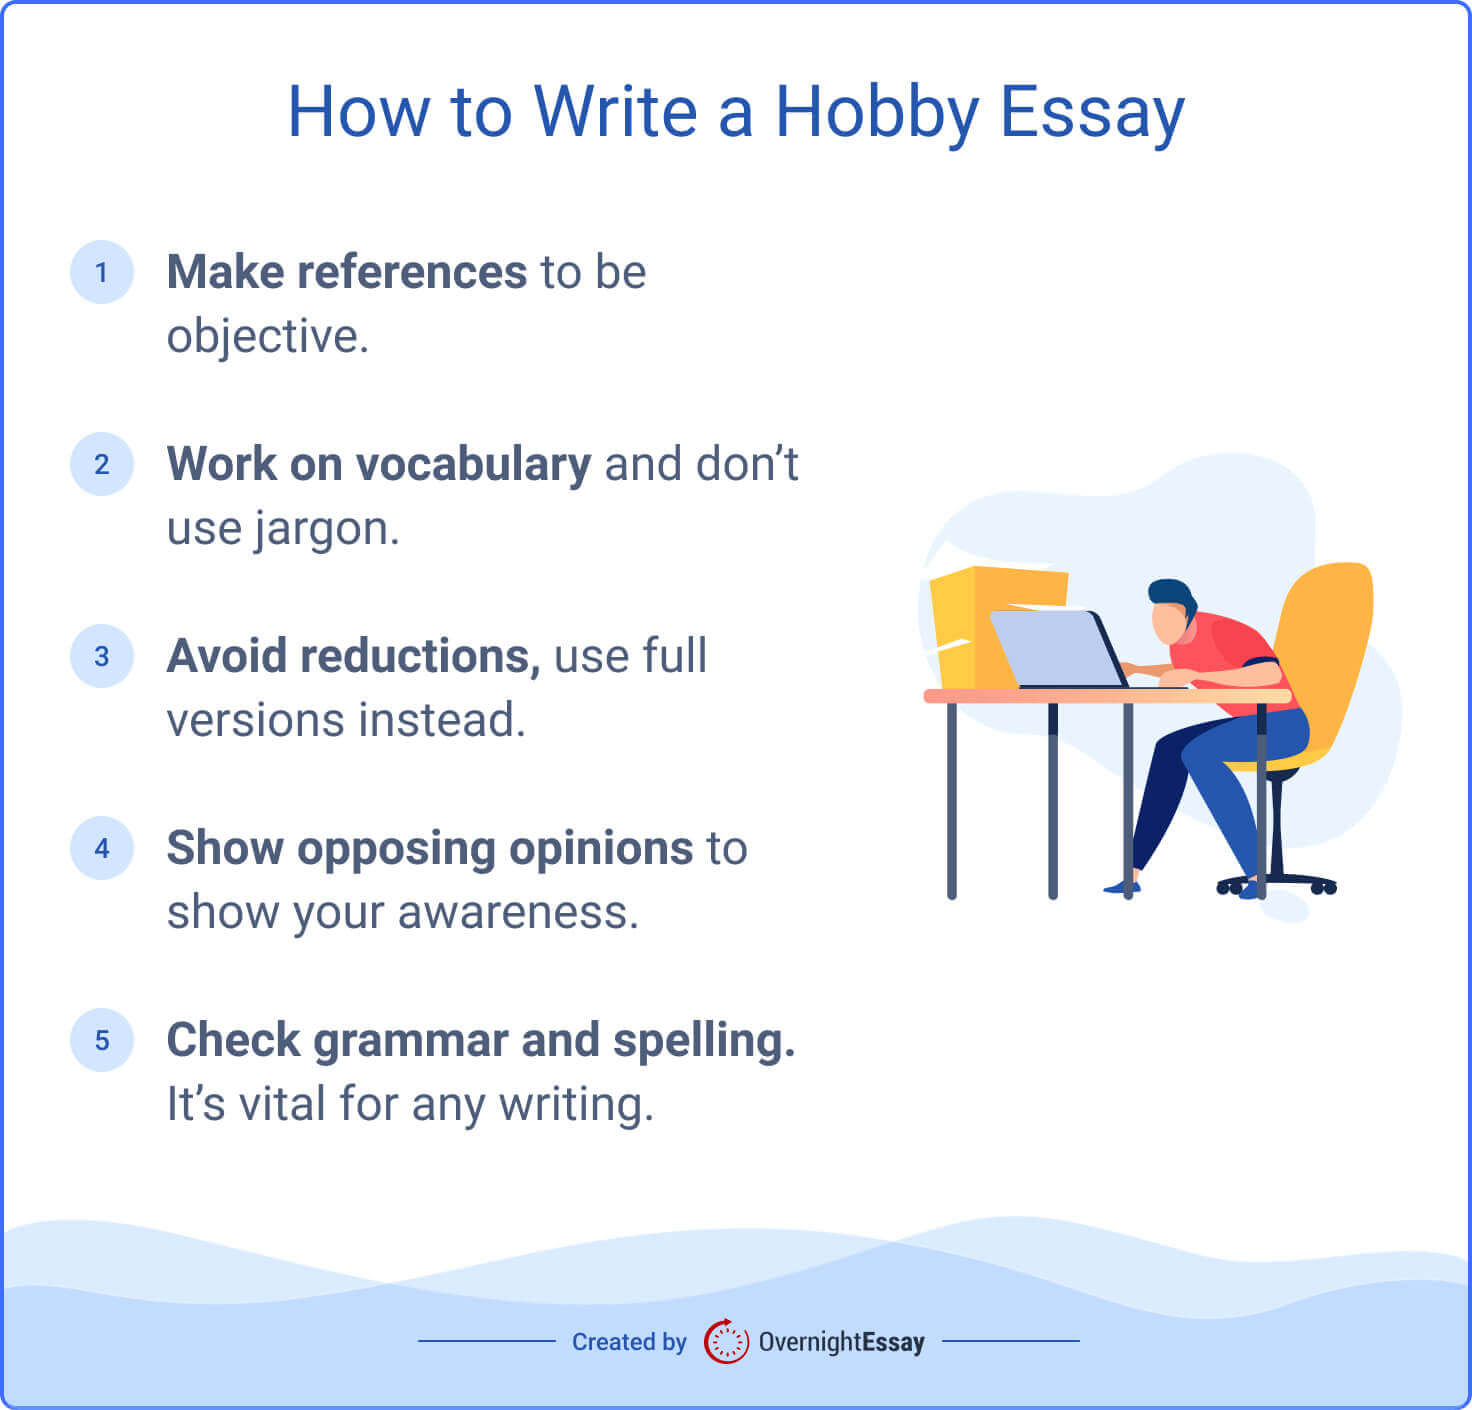 The picture contains 5 key rules of writing an essay about hobbies.